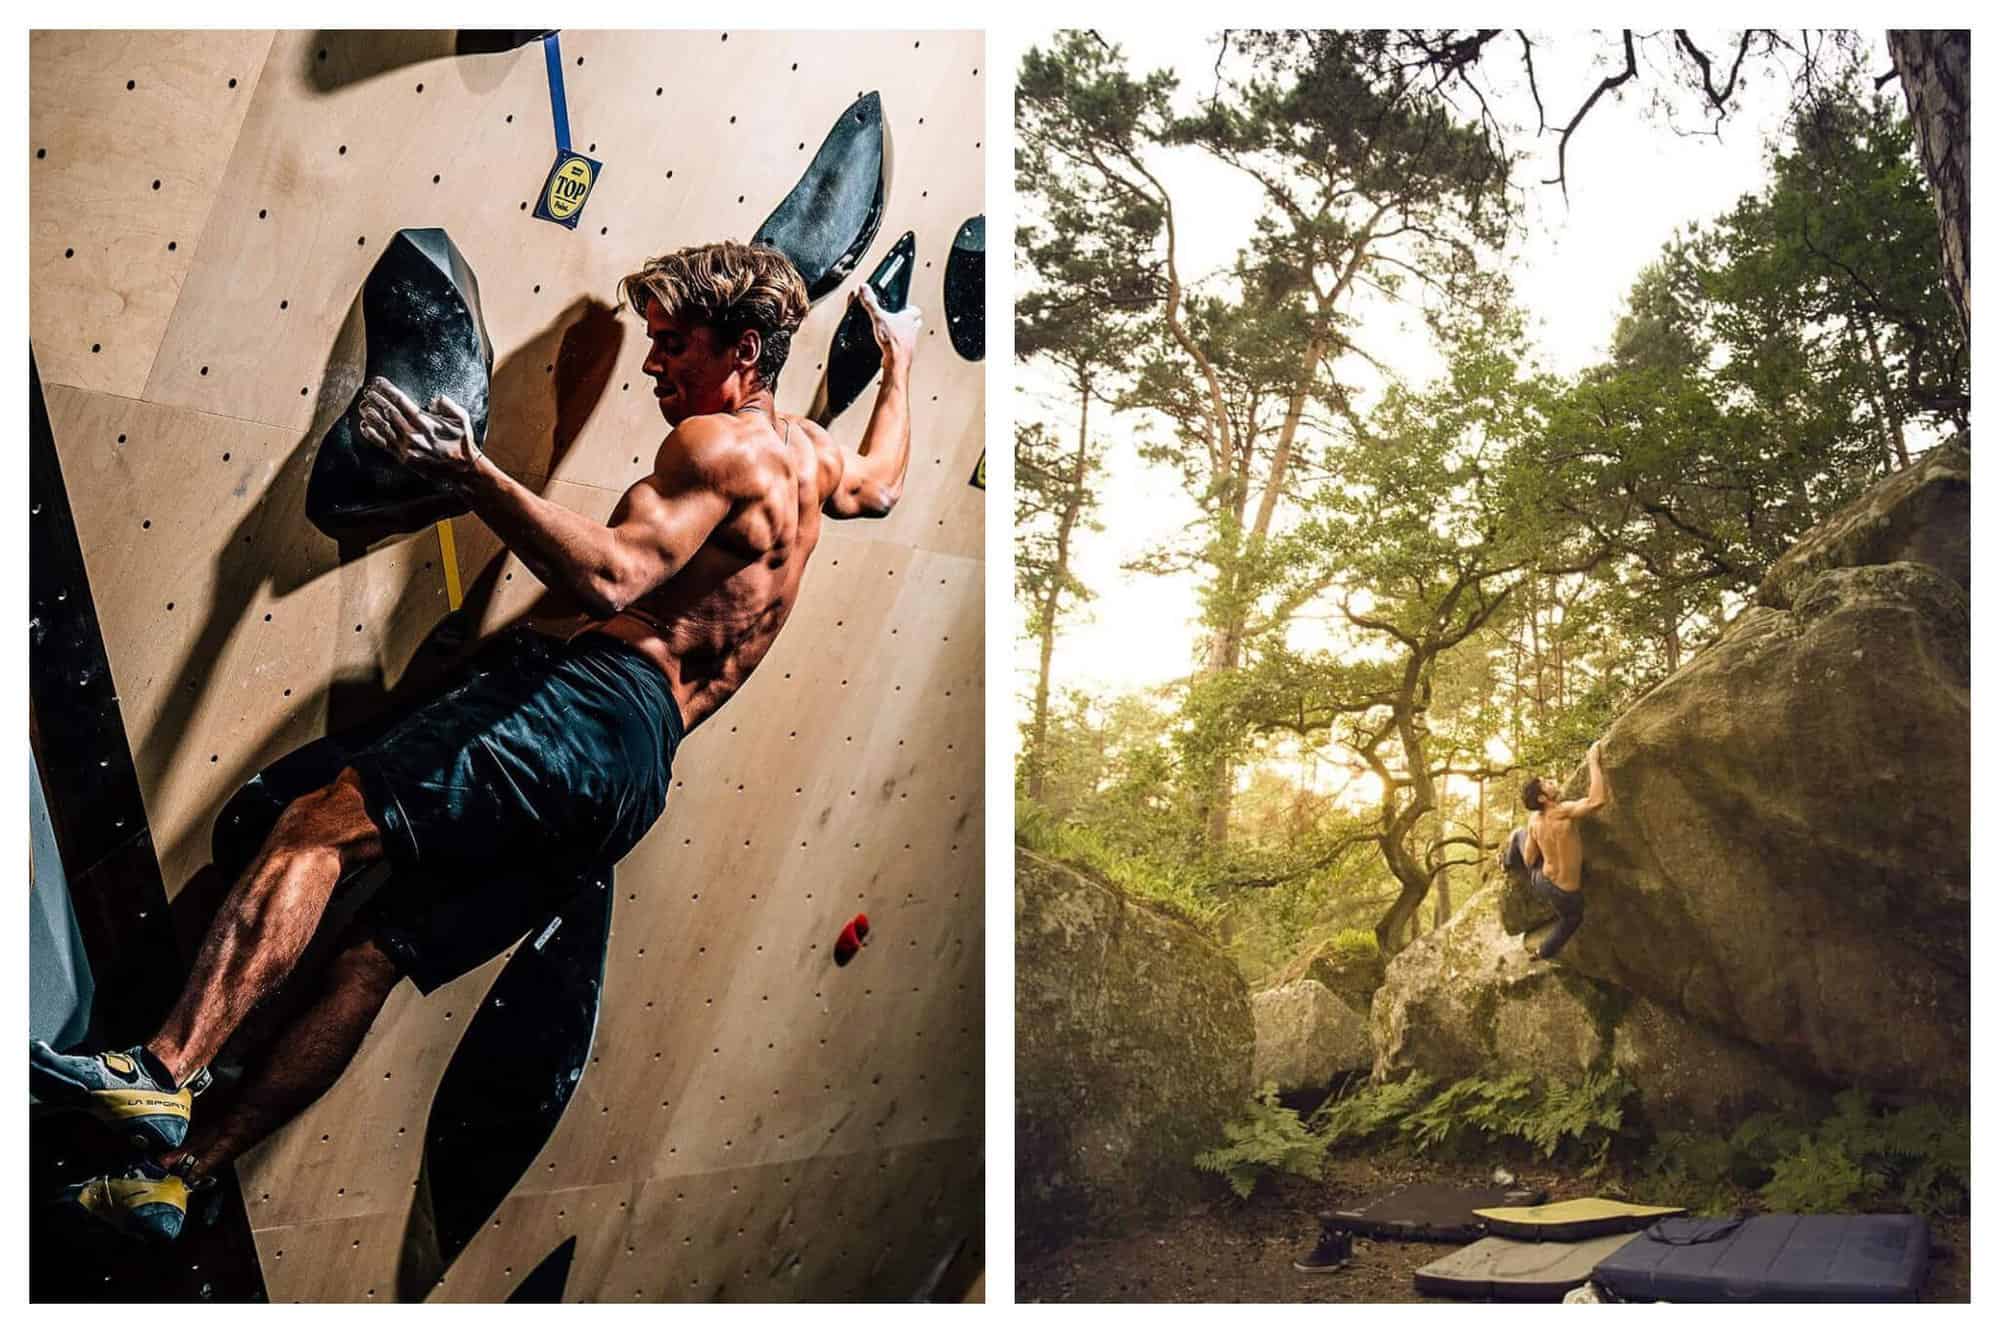 Young French climber Pierre Le Cerf tenses his muscles as he concentrates on the next move in Climbing District. A climber edges along a boulder in the Forest of Fontainebleau with crash mats beneath him and light breaking through the leafy trees.